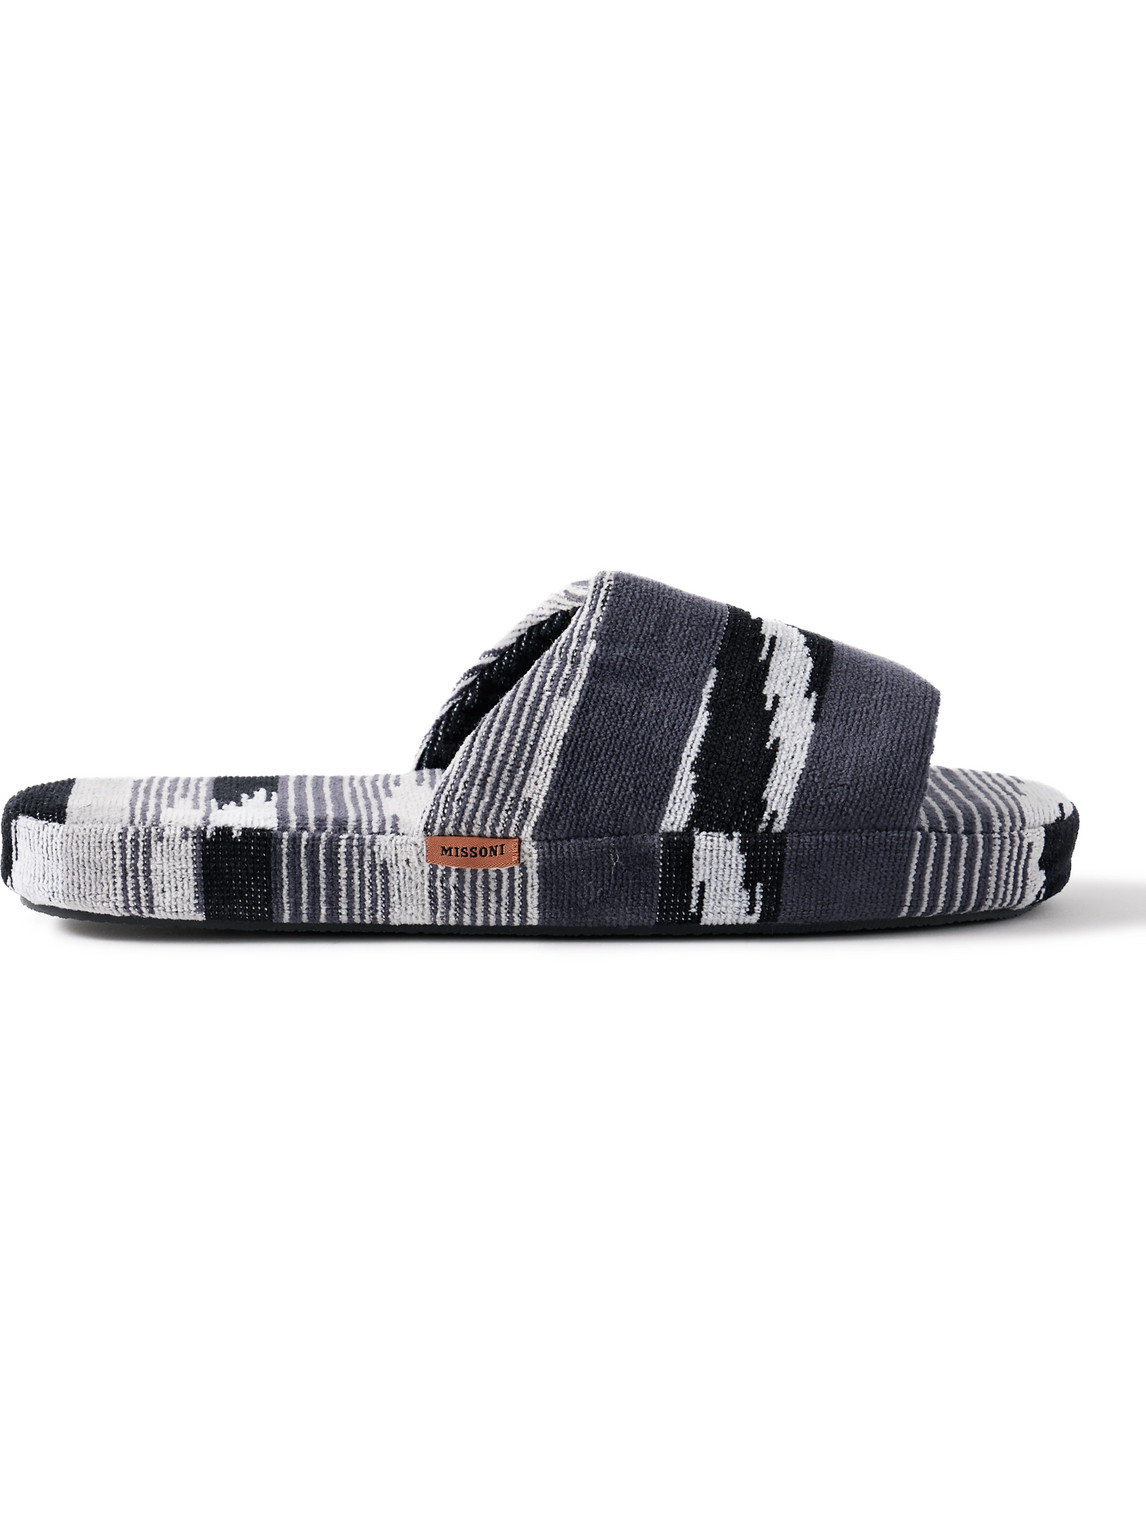 Missoni Clint Striped Cotton-terry Jacquard Slippers In Black